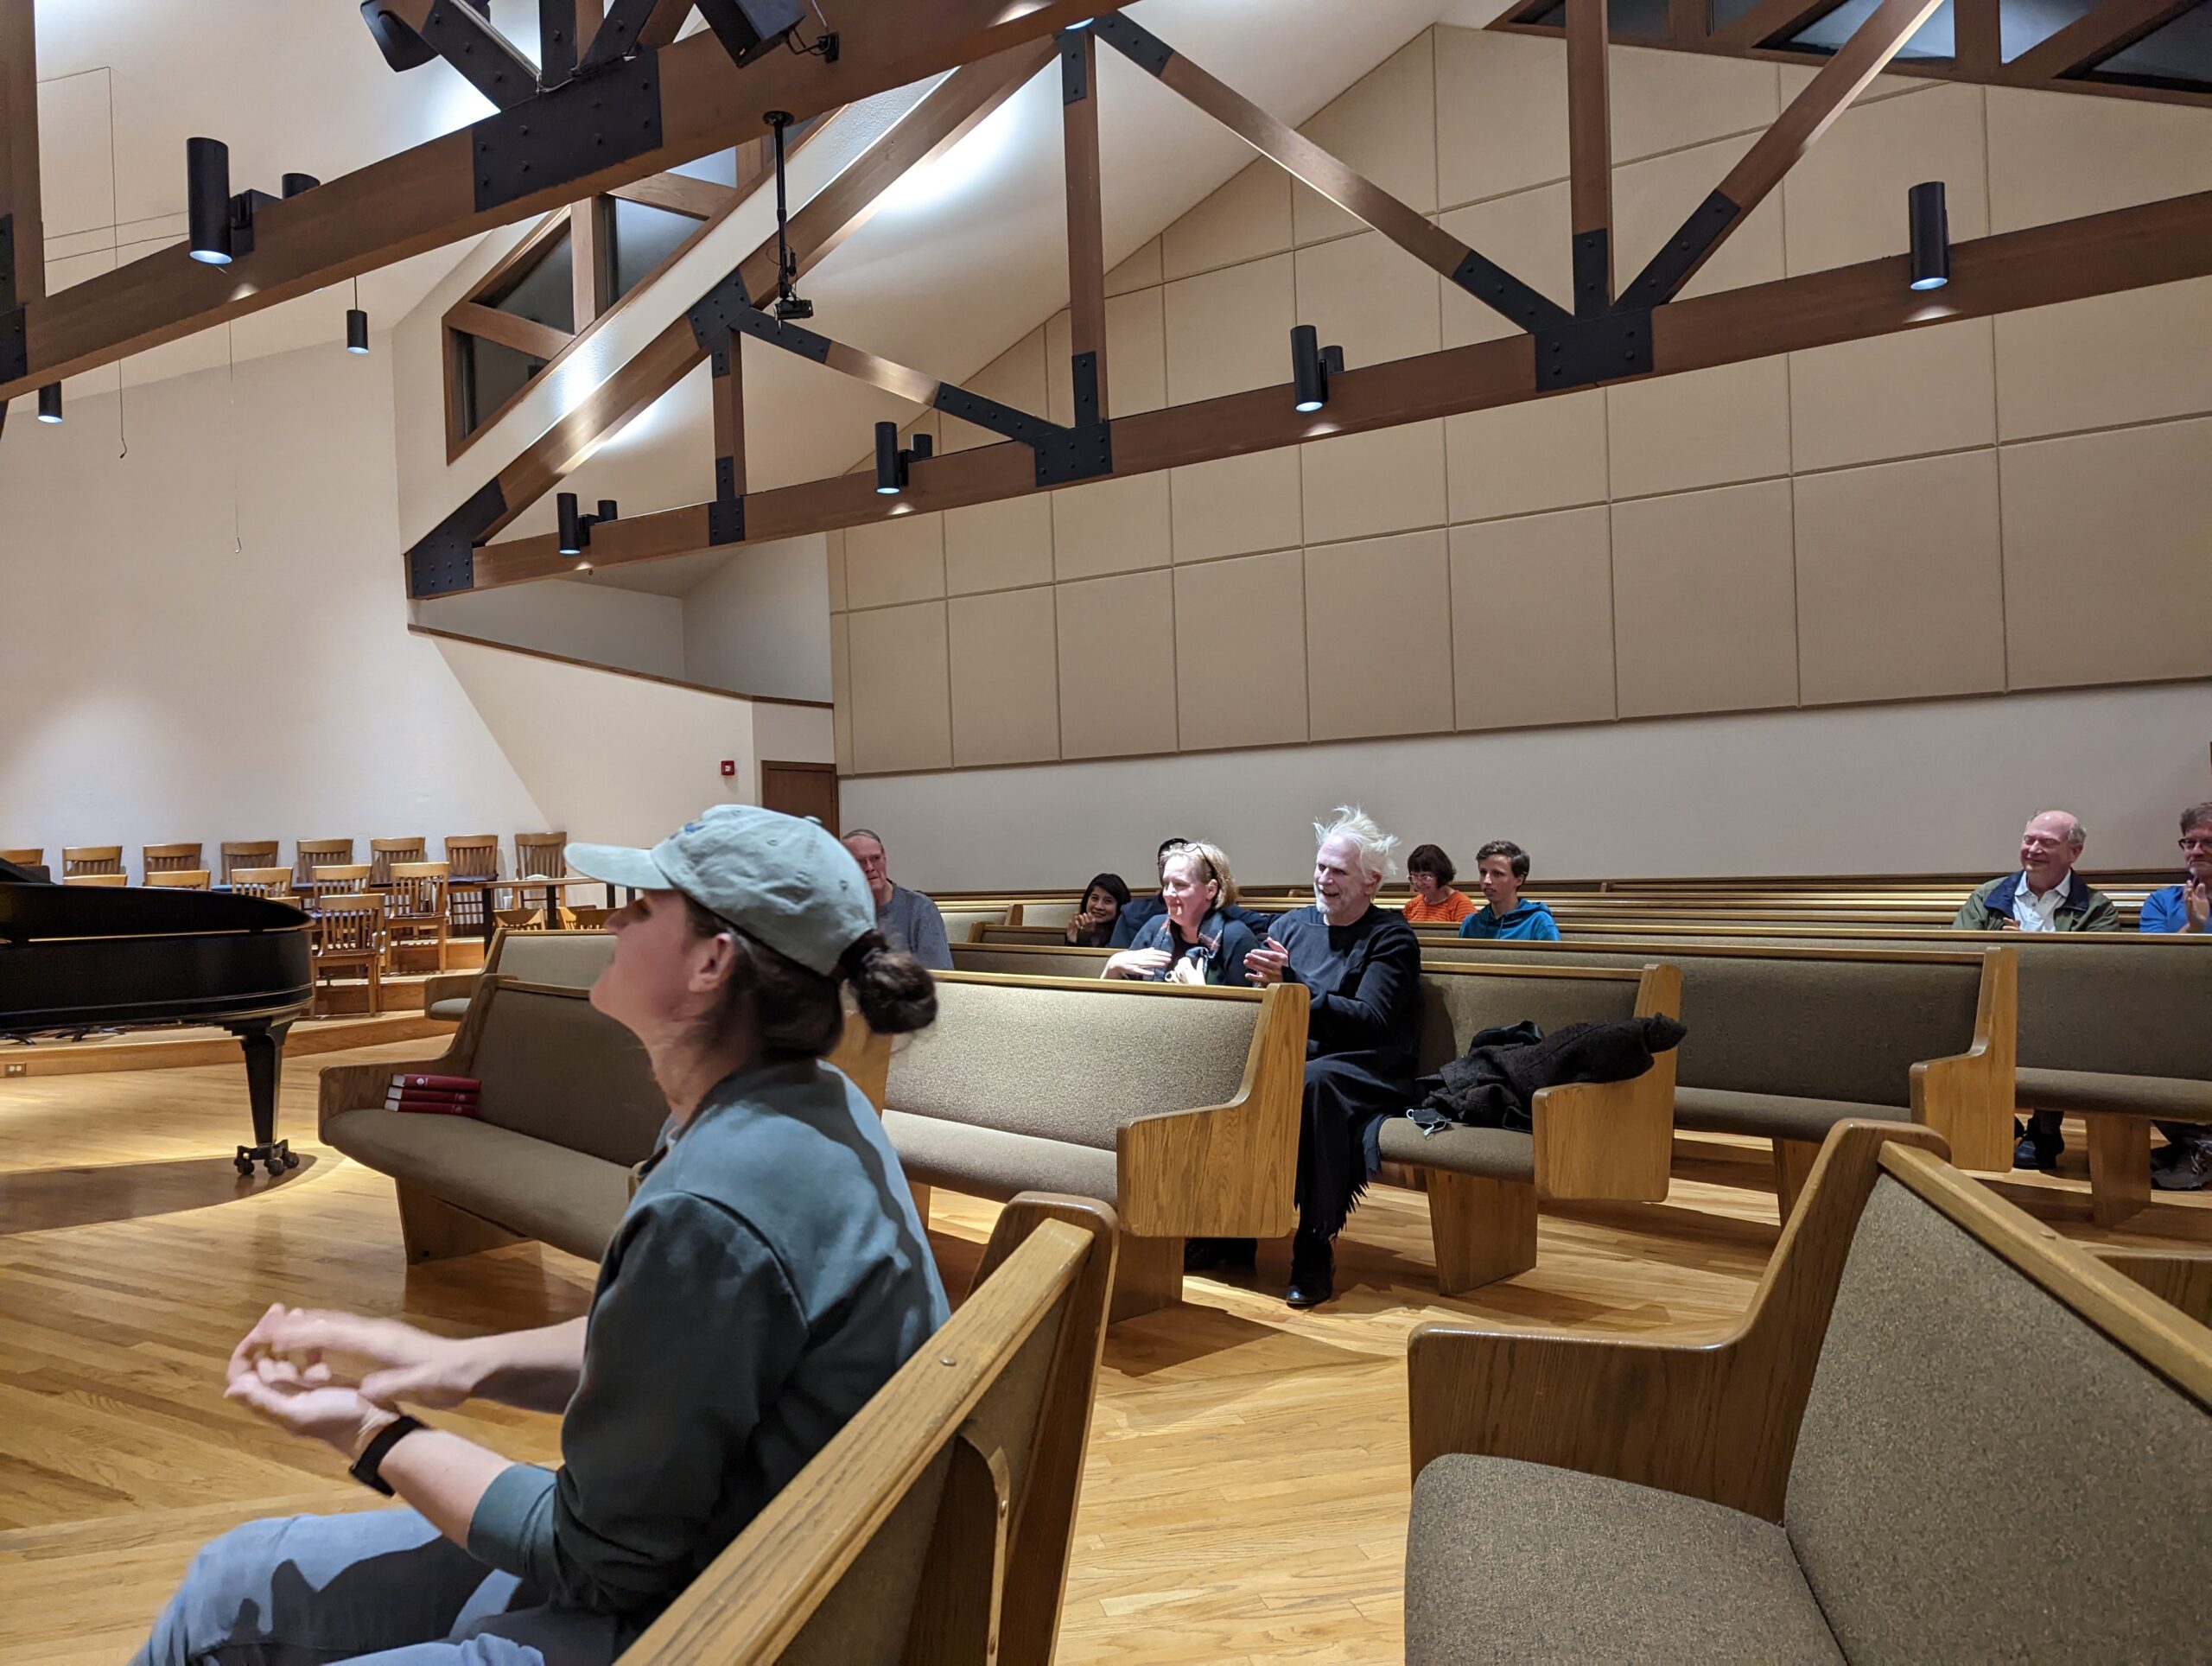 Church with people sitting in pews